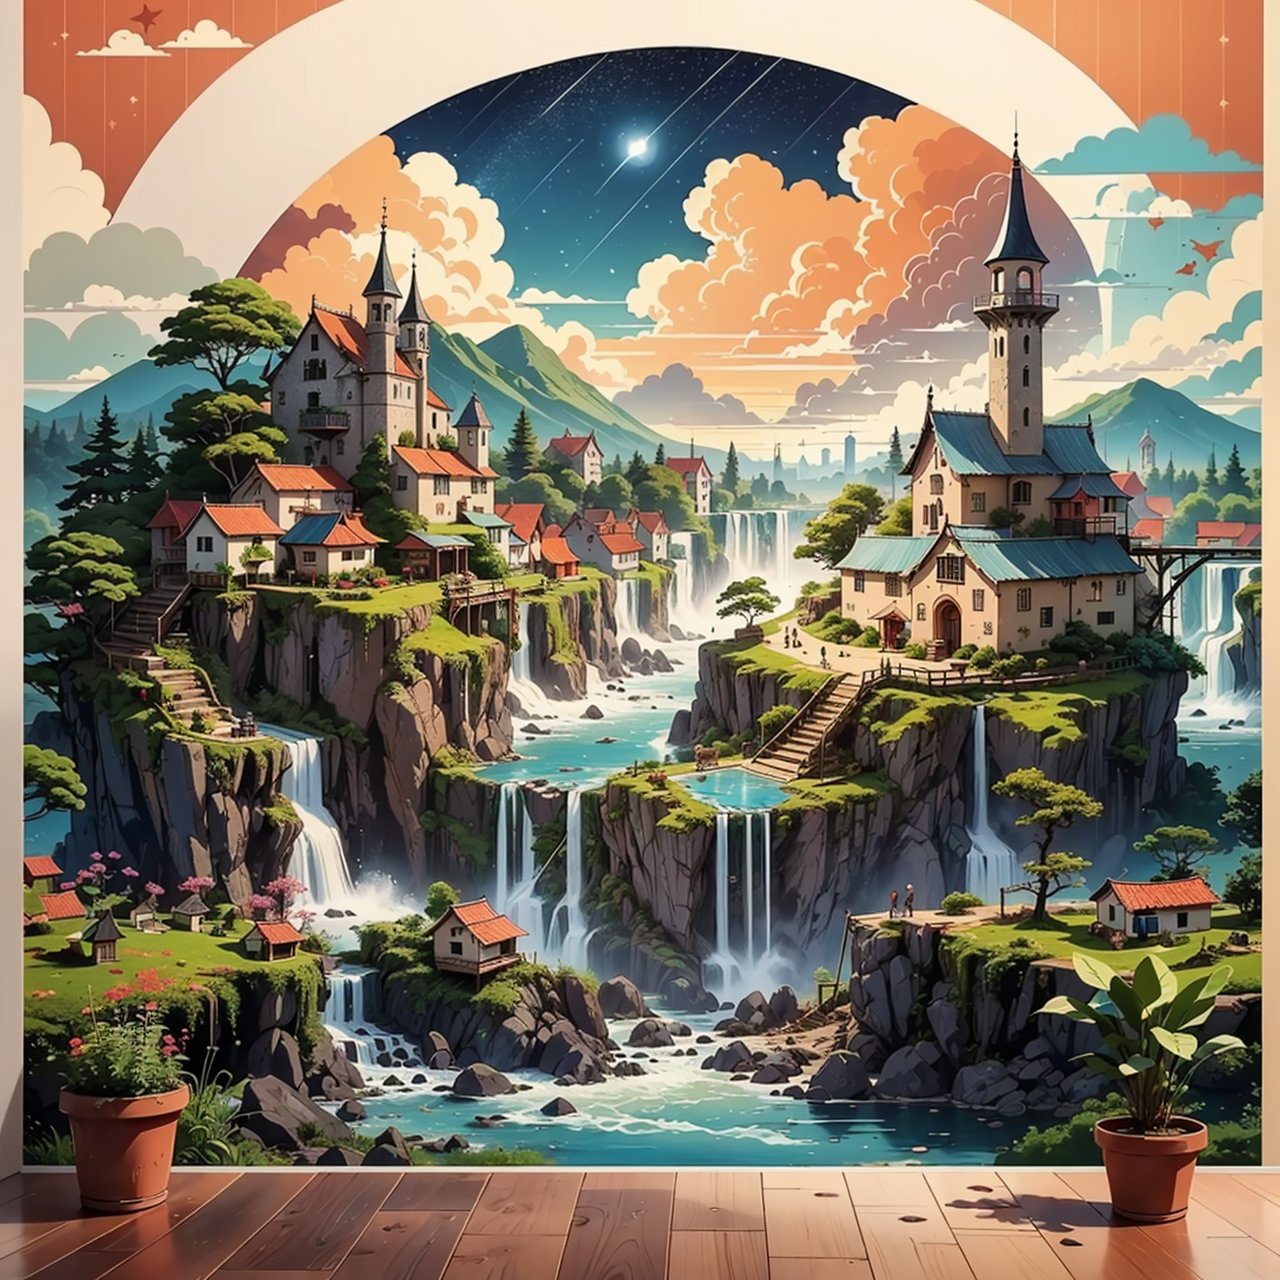 (((beautiful Wallpaper of the view of a afterlife ruined village surrounded by cloud that floating in the sky:1.4))), walled, very populated. view ground to sky, city of angels, isekai,Epic Land in the sky and a river and ((waterfall:1.4)) and ((lake)), ((night)), (((sky full star:1))), Landscape, fantasy, holism, pexels, pinterest, stock photo, shutterstock, picture, behance, tilt shift photo, jigsaw puzzle, ecological art, Solarpunk, Solarpunk, microscopic photos,, environmental art, color field, Basawan, Parable, Architectural, over-rice, unsplash, Triangulation, Food Art,
Add More Details, no human,genshin impact,4esthet1c